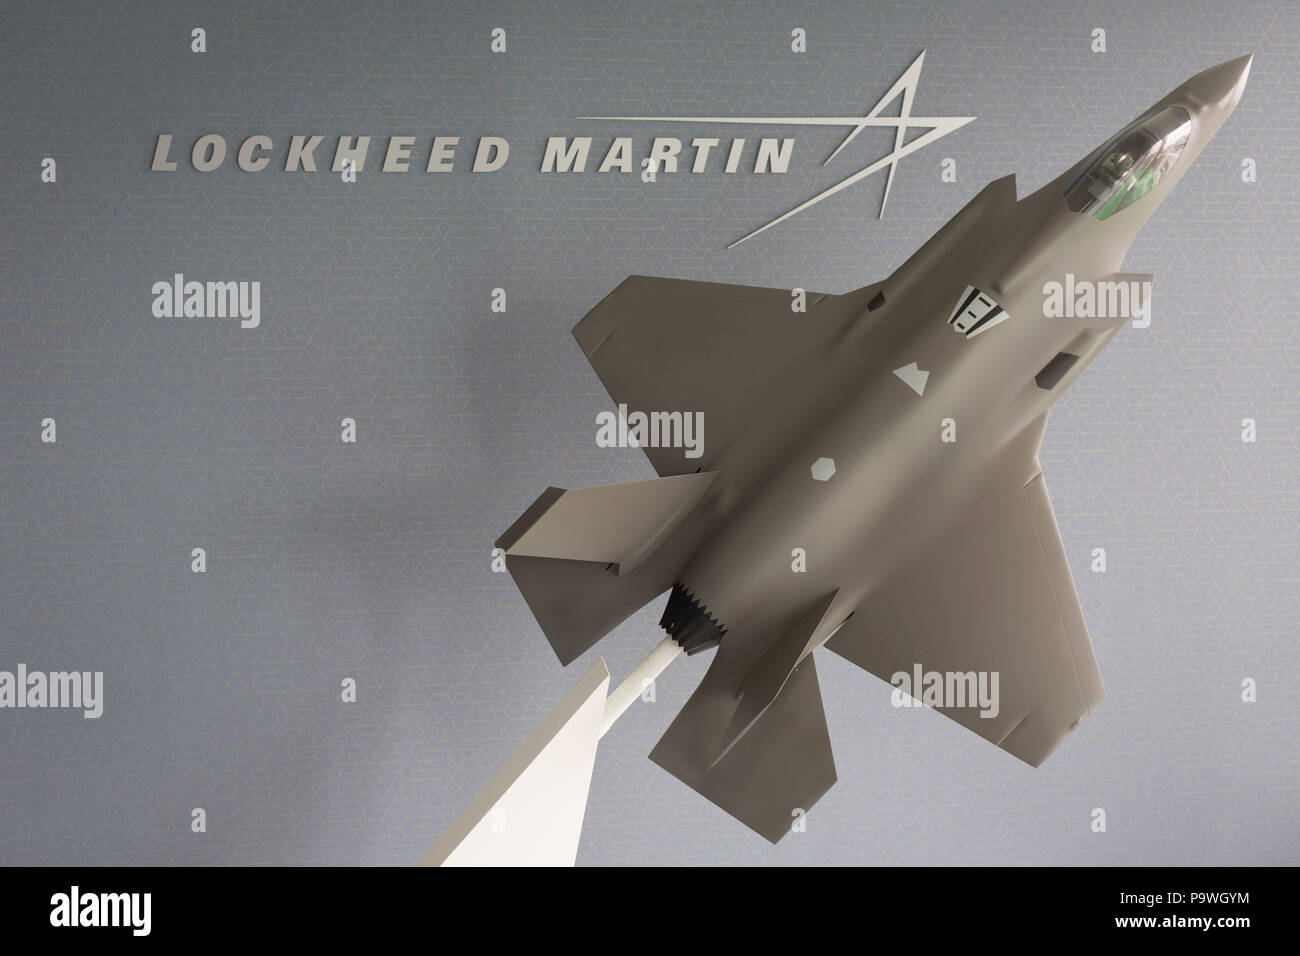 The Lockheed Martin logo and a model of their F-35 Lightening fighter in the company's hospitality chalet at the Farnborough Airshow, on 18th July 2018, in Farnborough, England. Stock Photo